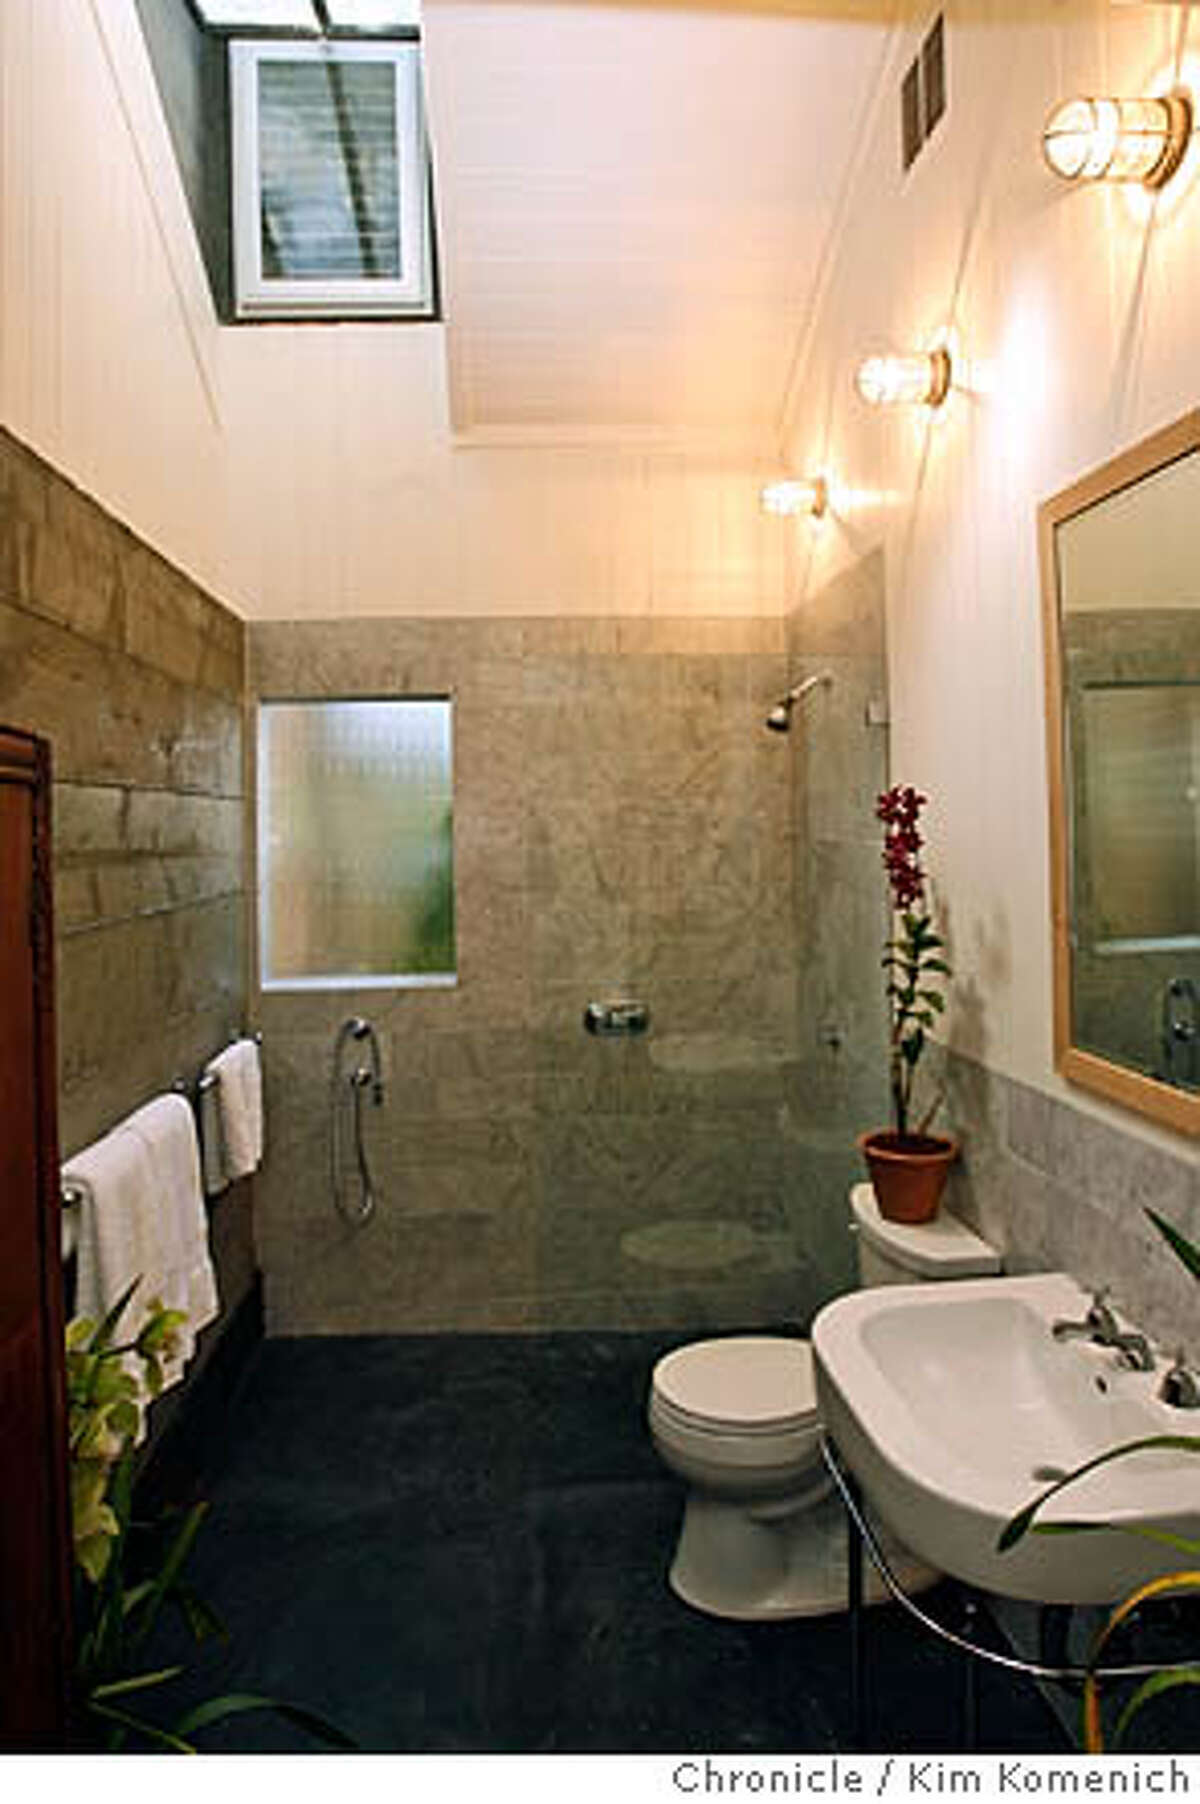 DUPLEX26_0012_KK.JPG Bathroom of rear unit. Note high ceilings and skynights. Architect Malcolm Davis and his partner Brian Lackey own a duplex in the Castro. Originally, the house was being sold as a tear-down, even with plans for a new 3,500 square foot house, included. Davis decided to go a different way, preserving the existing building. What we now have is two one-bedroom units, only about 700 square feet each, but they feel a whole lot bigger because of creative use of space and light. San Francisco Chronicle photo by Kim Komenich 2/21/06 � Copyright 2006 Kim Komenich/San Francisco Chronicle